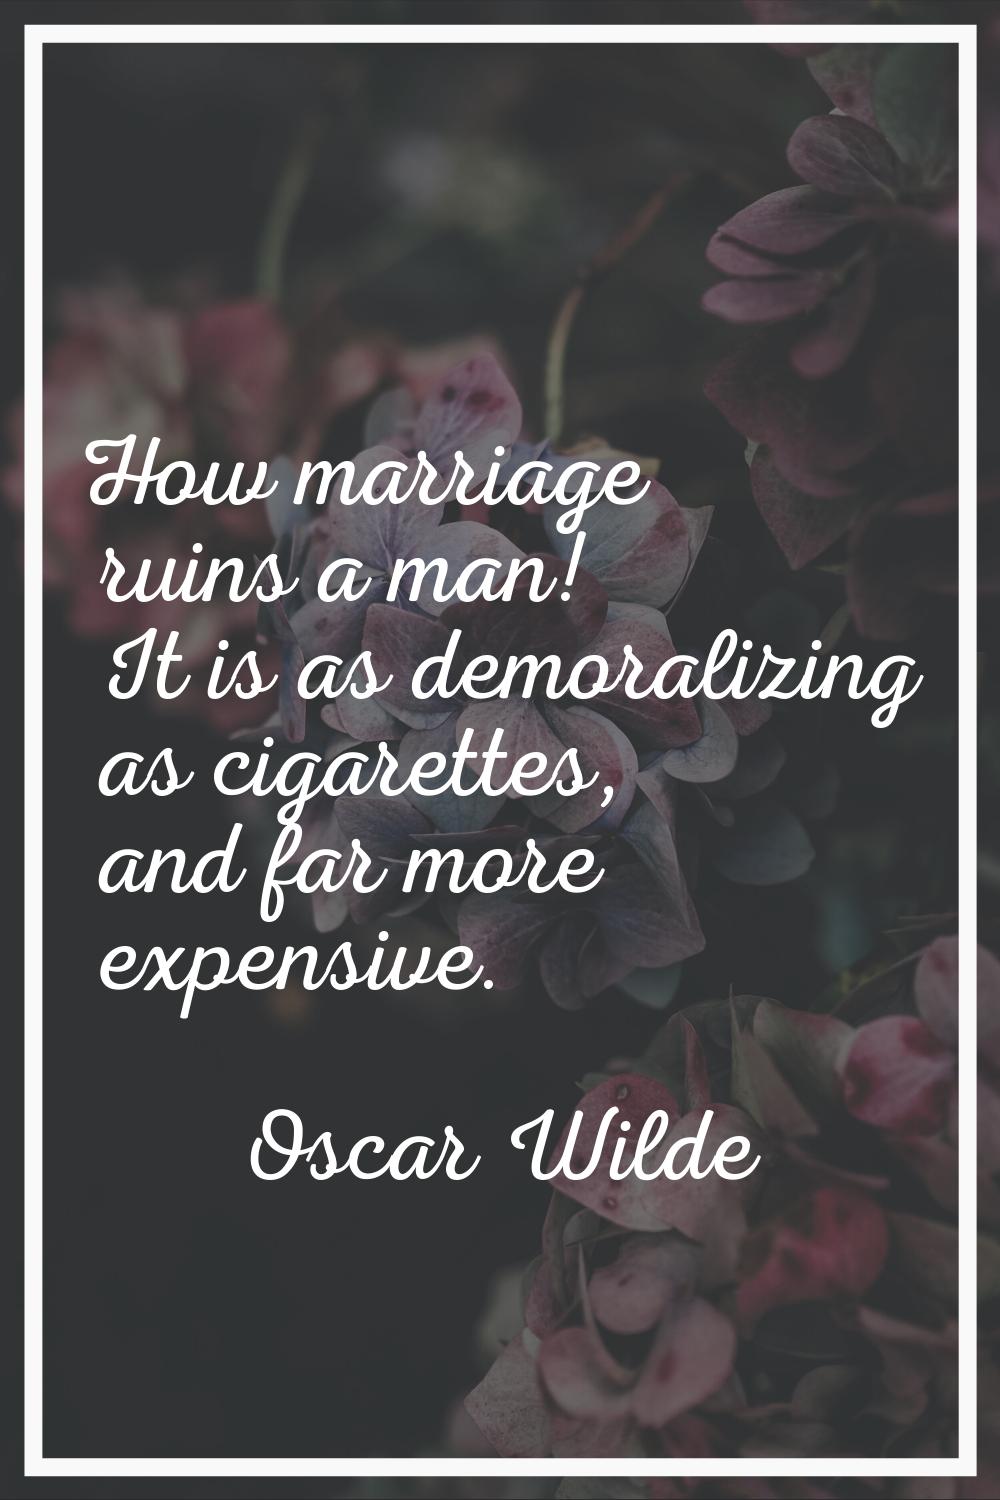 How marriage ruins a man! It is as demoralizing as cigarettes, and far more expensive.